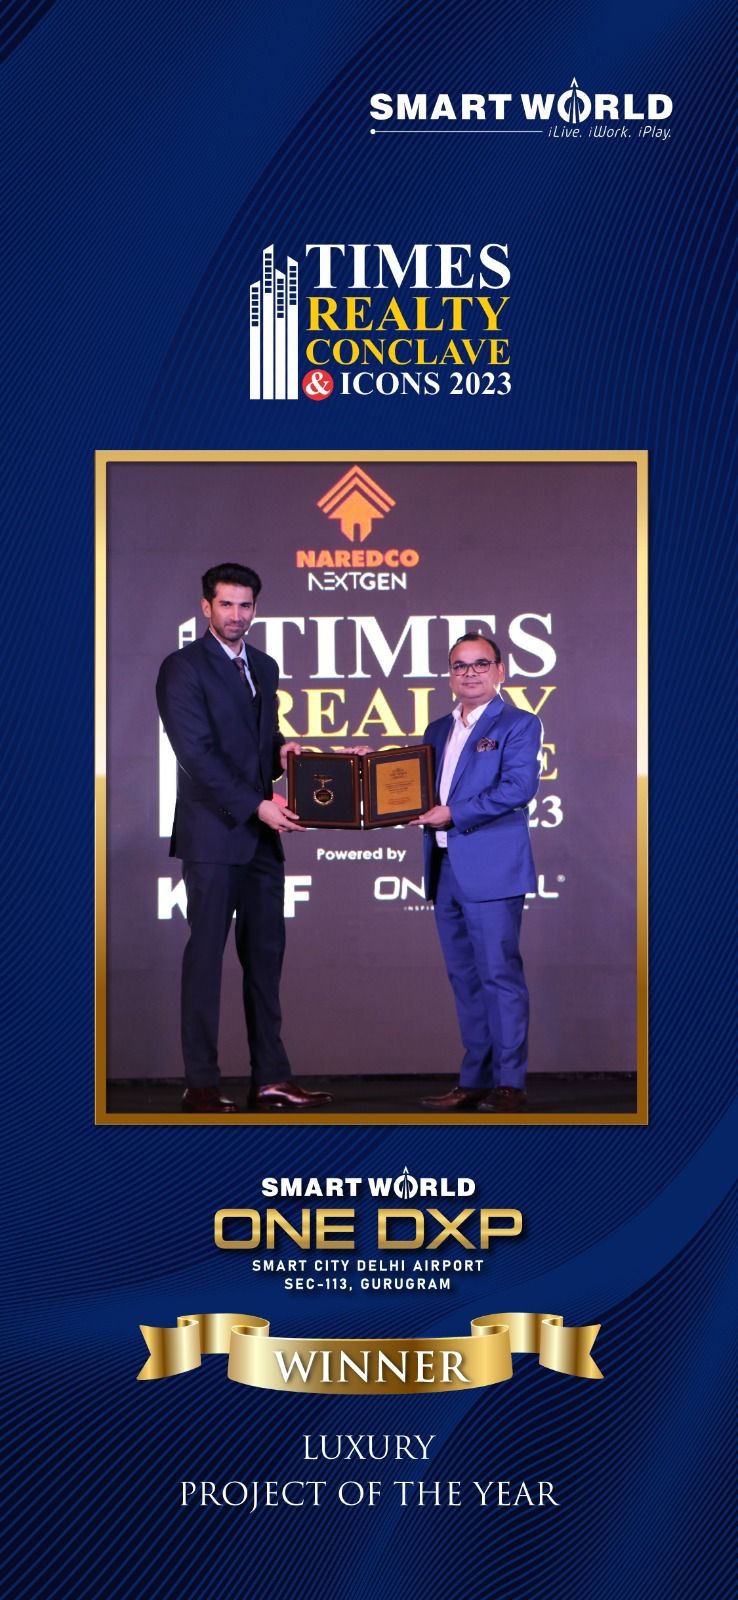 Smartworld One DXP has been awarded with the luxury project of the year award 2023 at The Times Realty Conclave & Icons 2023 Update